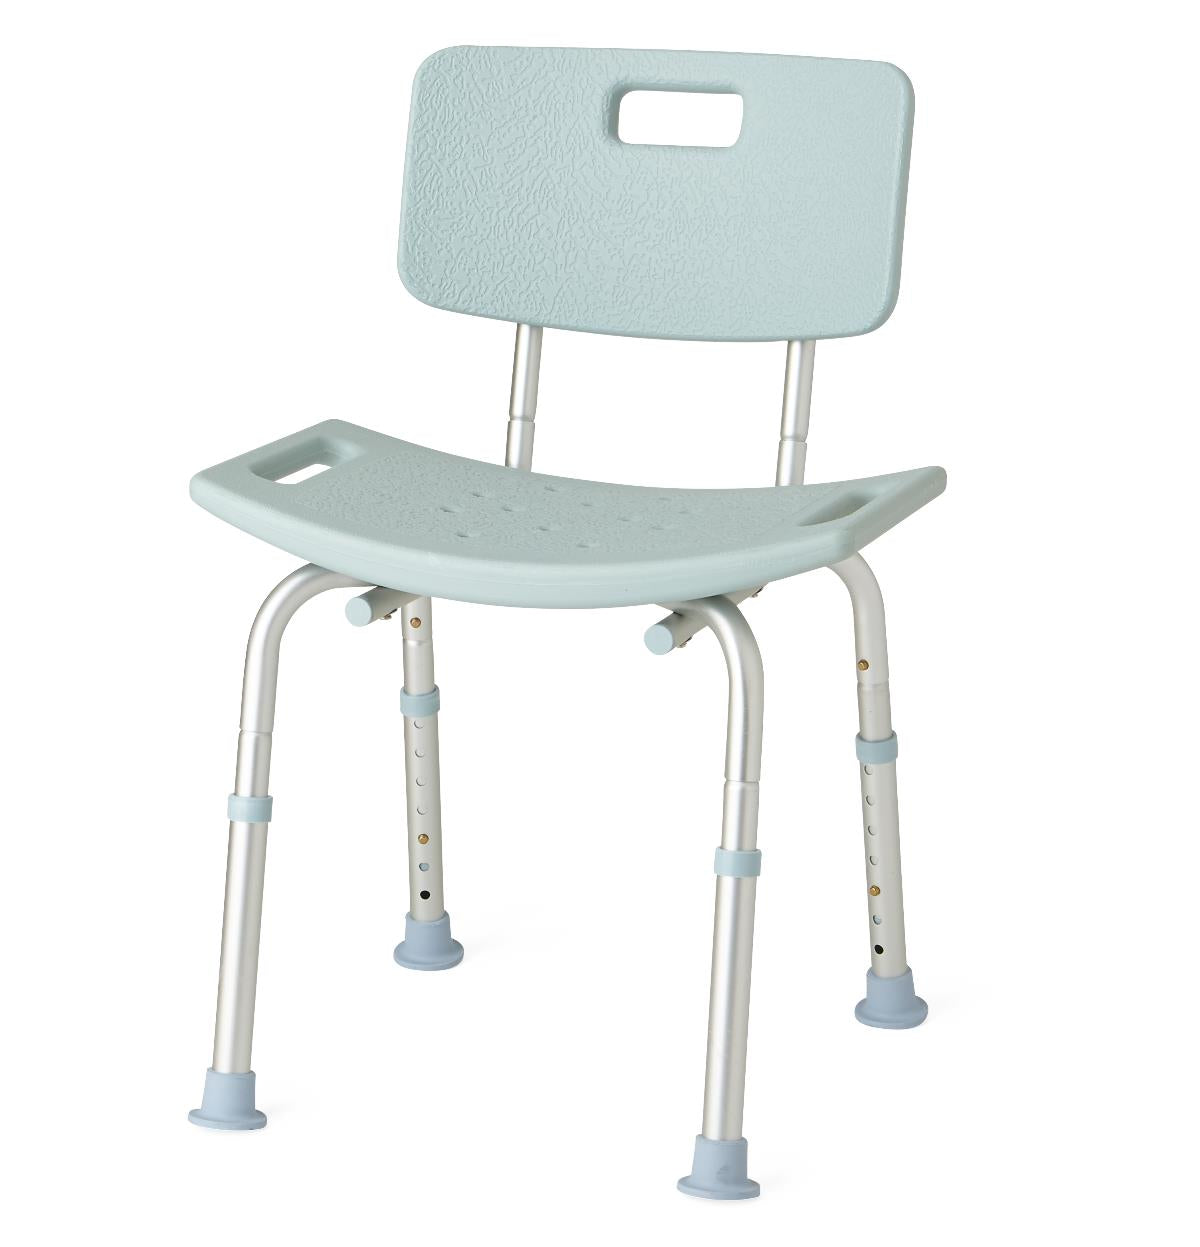 Knockdown Shower Chair with Back